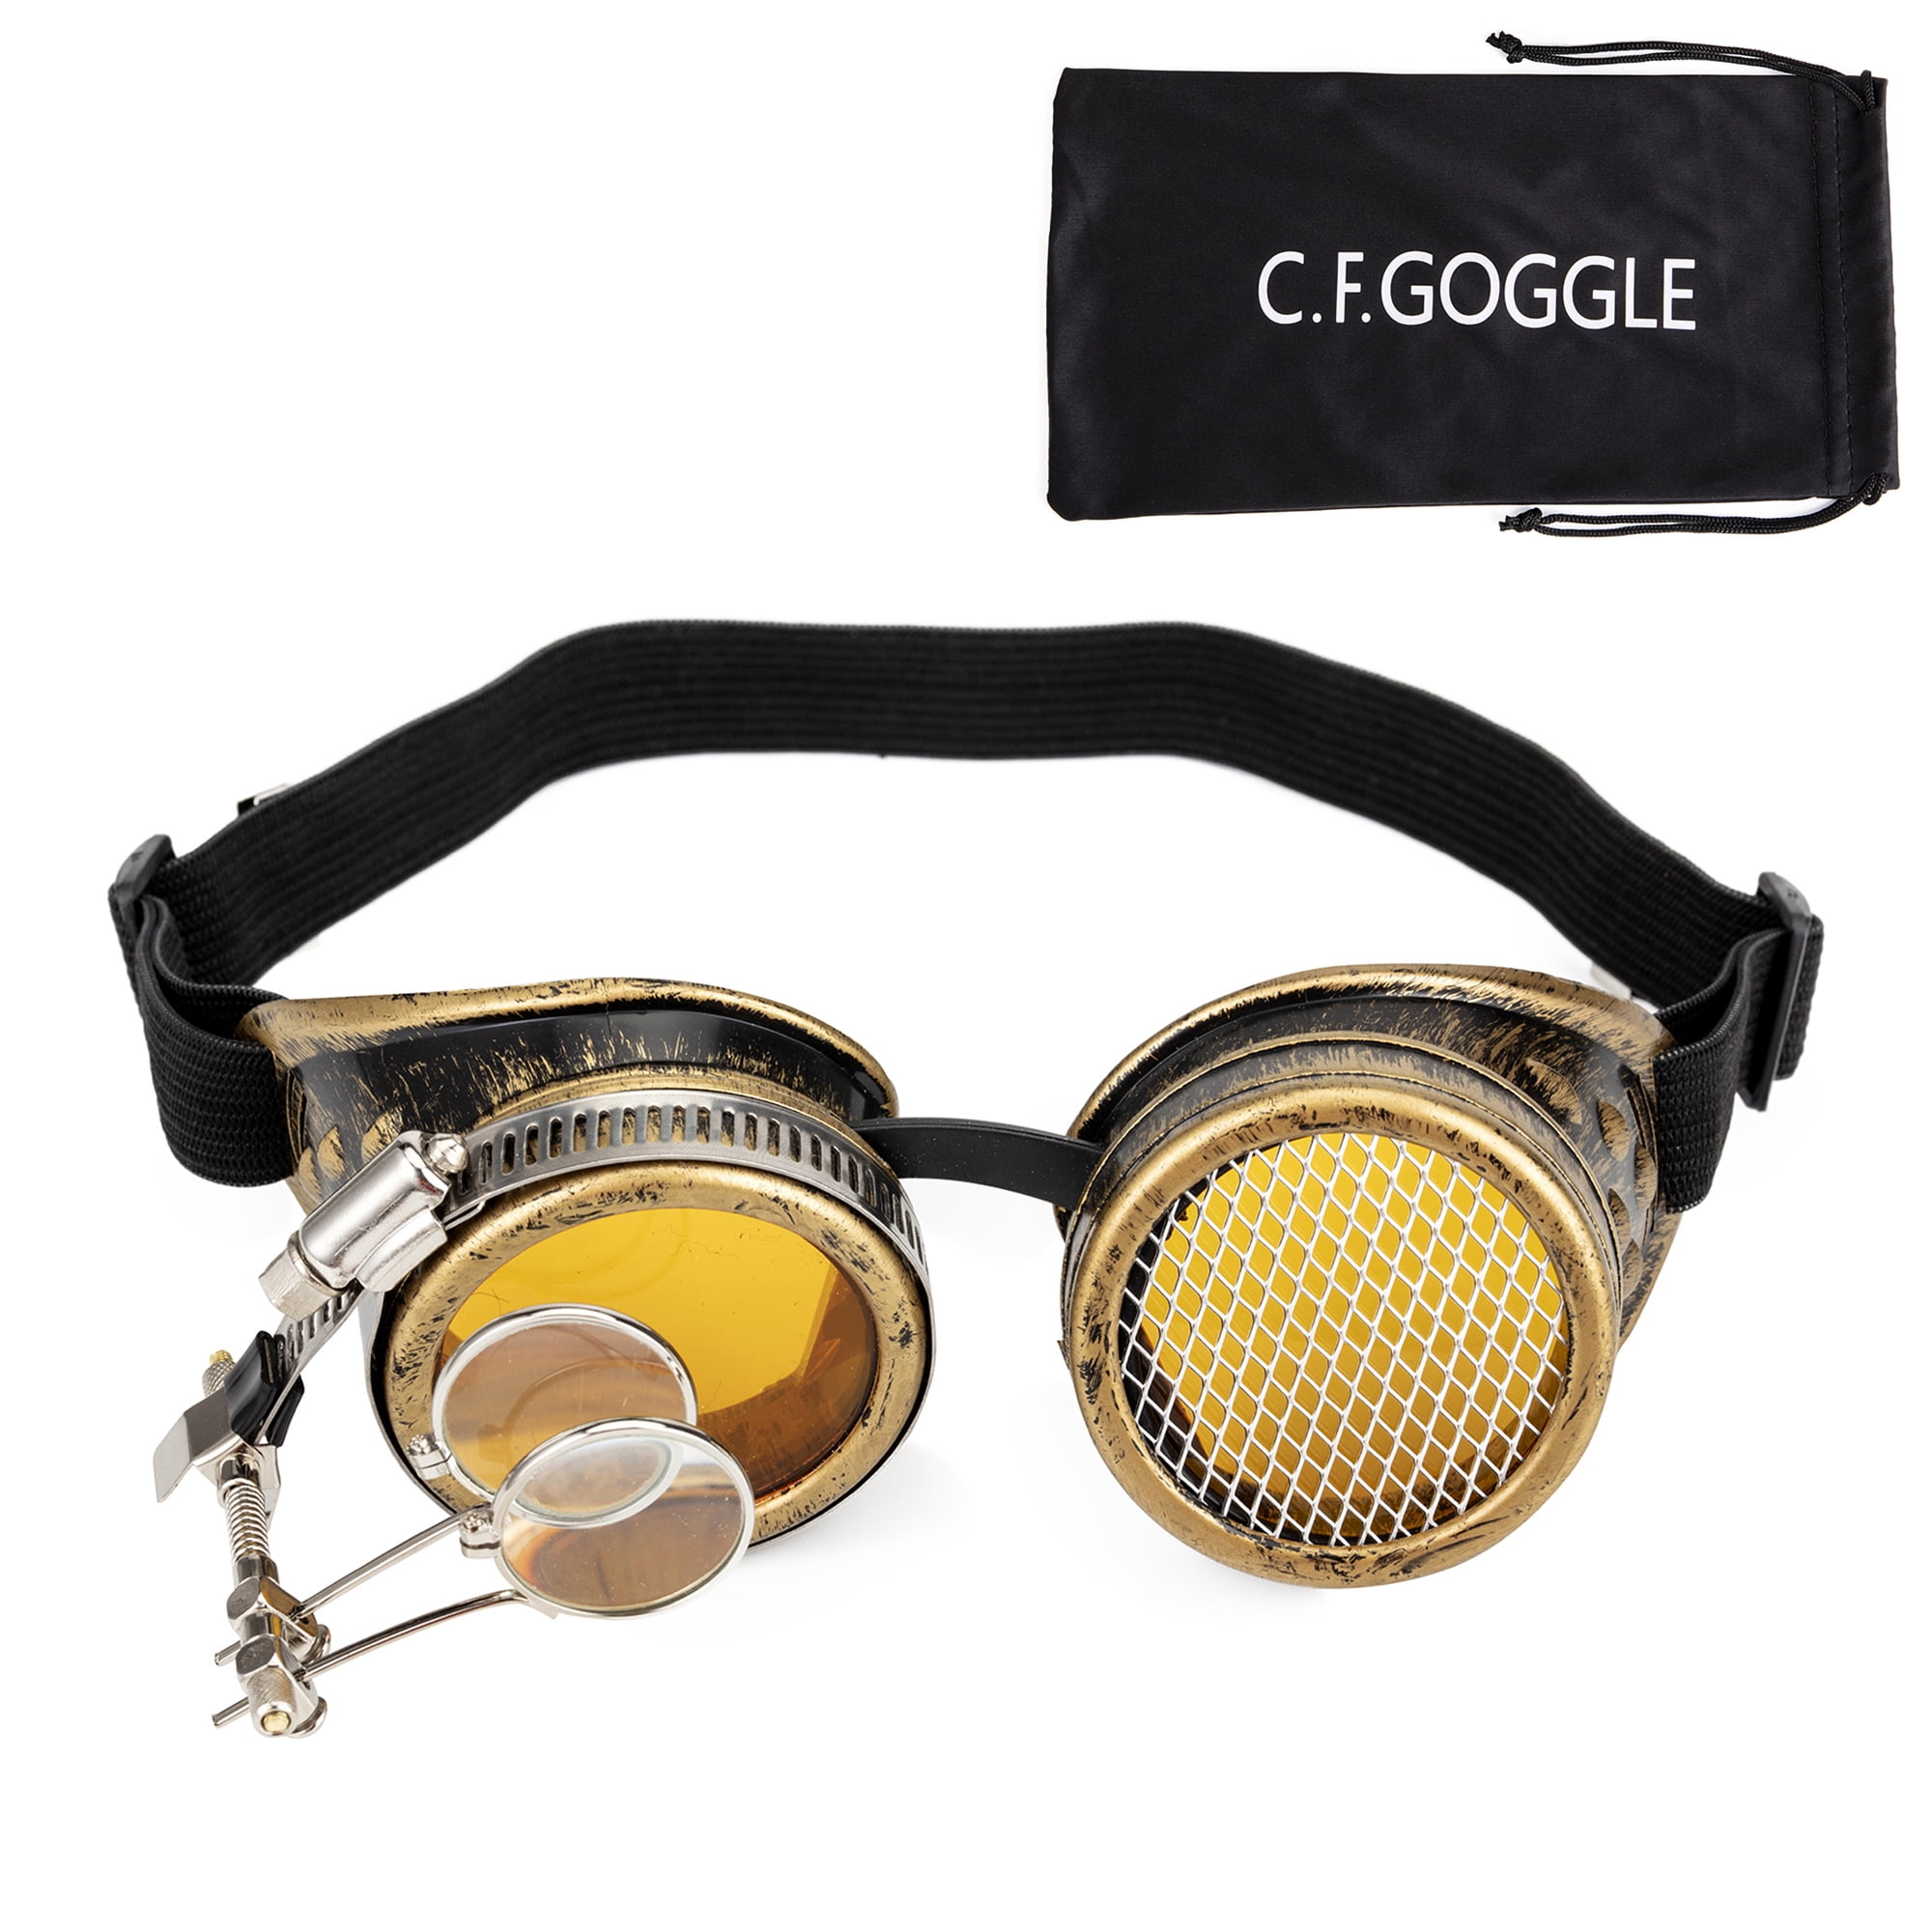 New C.F.GOGGLE Barbed Goggles Steampunk Glasses Welding Cosplay Costume Cool Men 